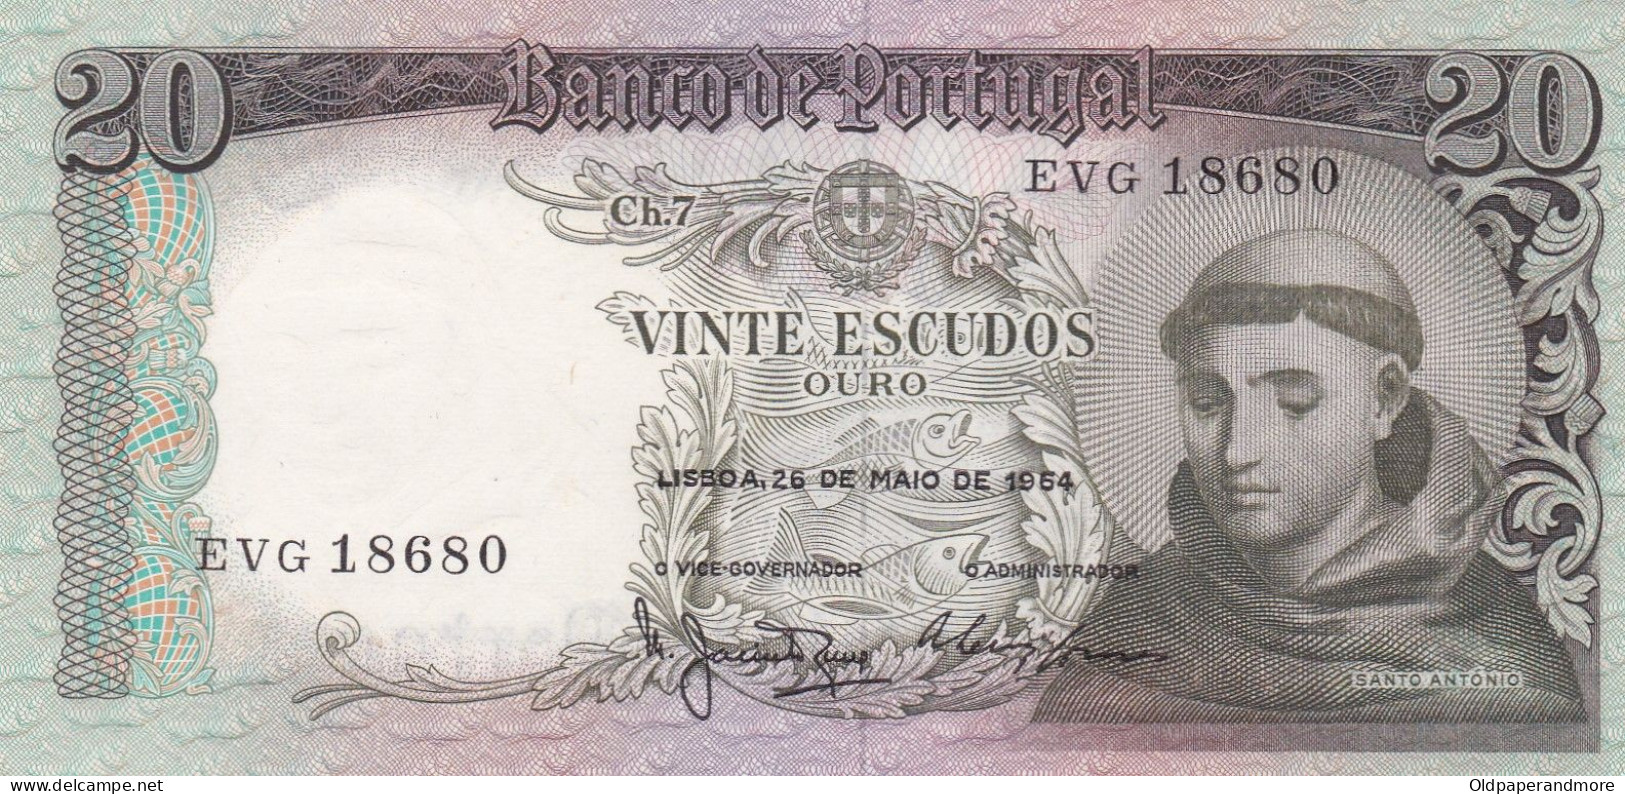 PORTUGAL BANK NOTE - BANKNOTE - 20$00 - CH 7  - 26/05/1954 AUNC - Portugal